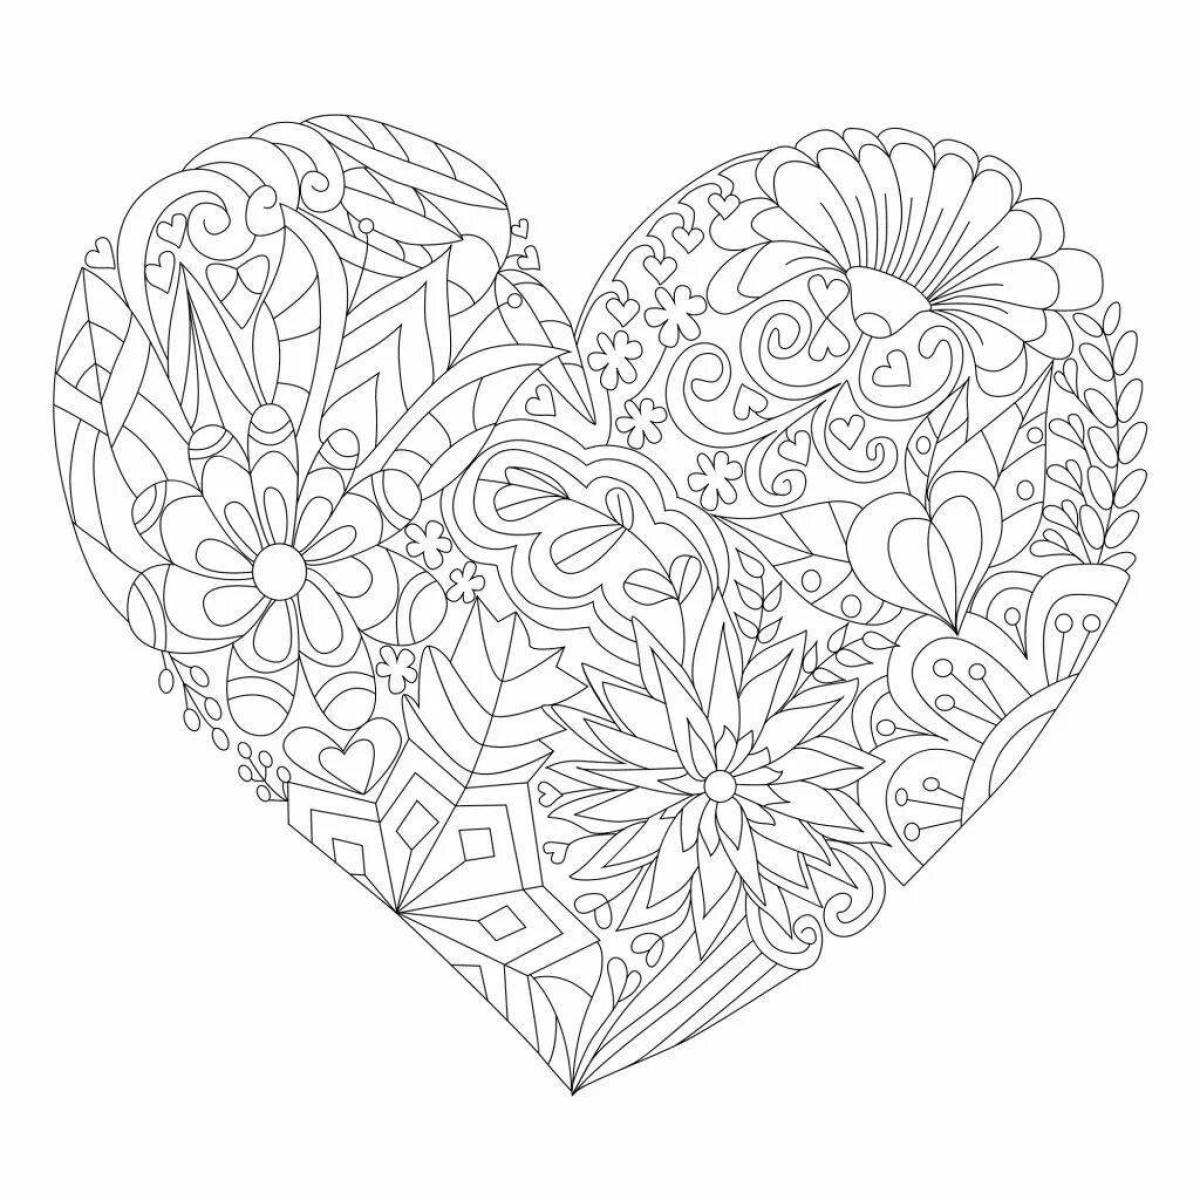 Glossy intricate heart coloring